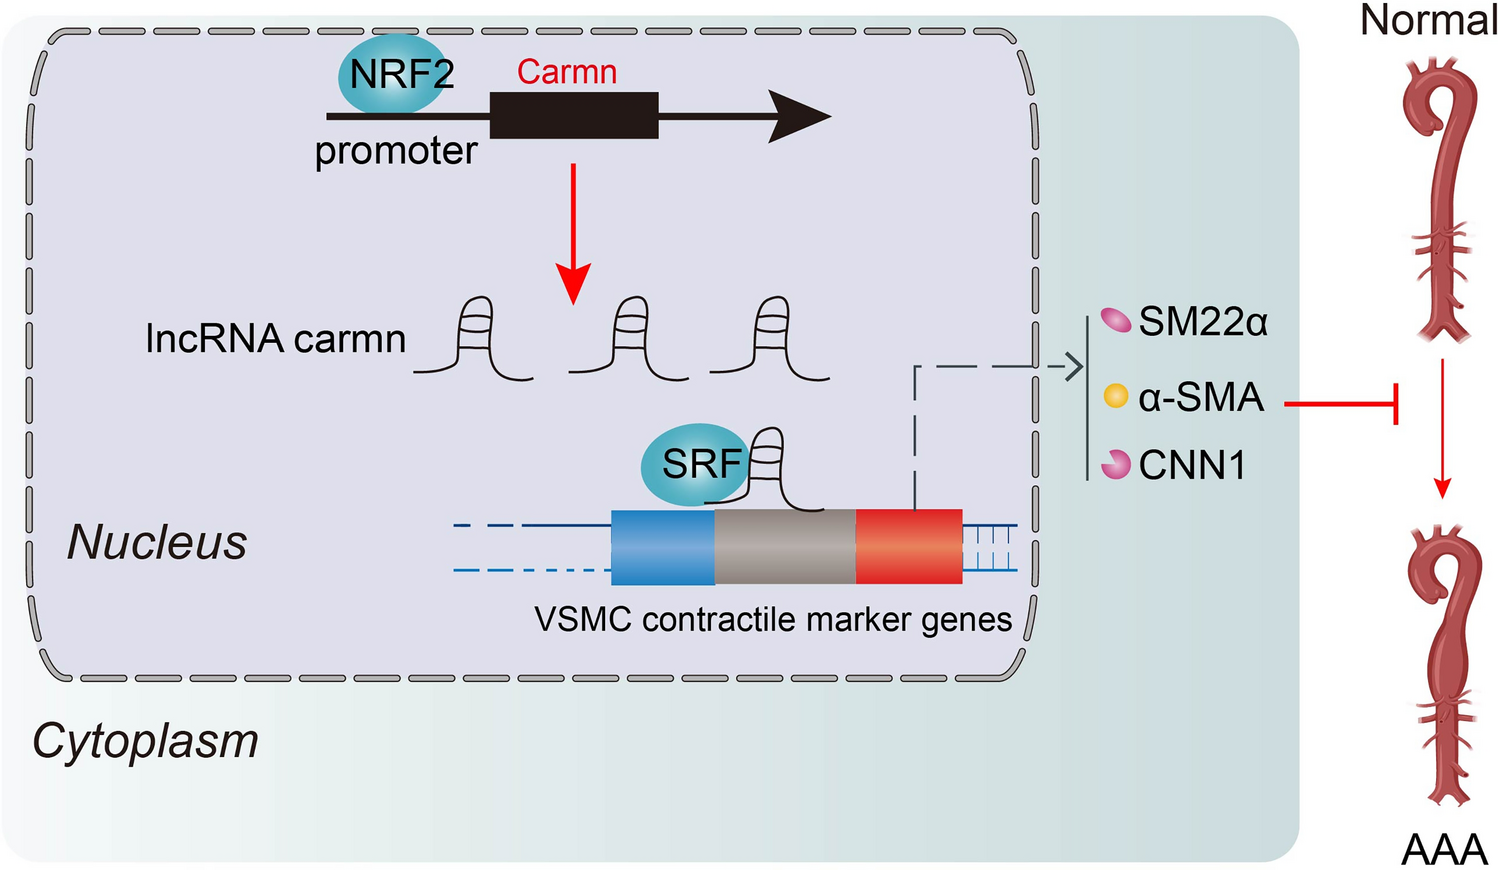 LncRNA CARMN inhibits abdominal aortic aneurysm formation and vascular smooth muscle cell phenotypic transformation by interacting with SRF